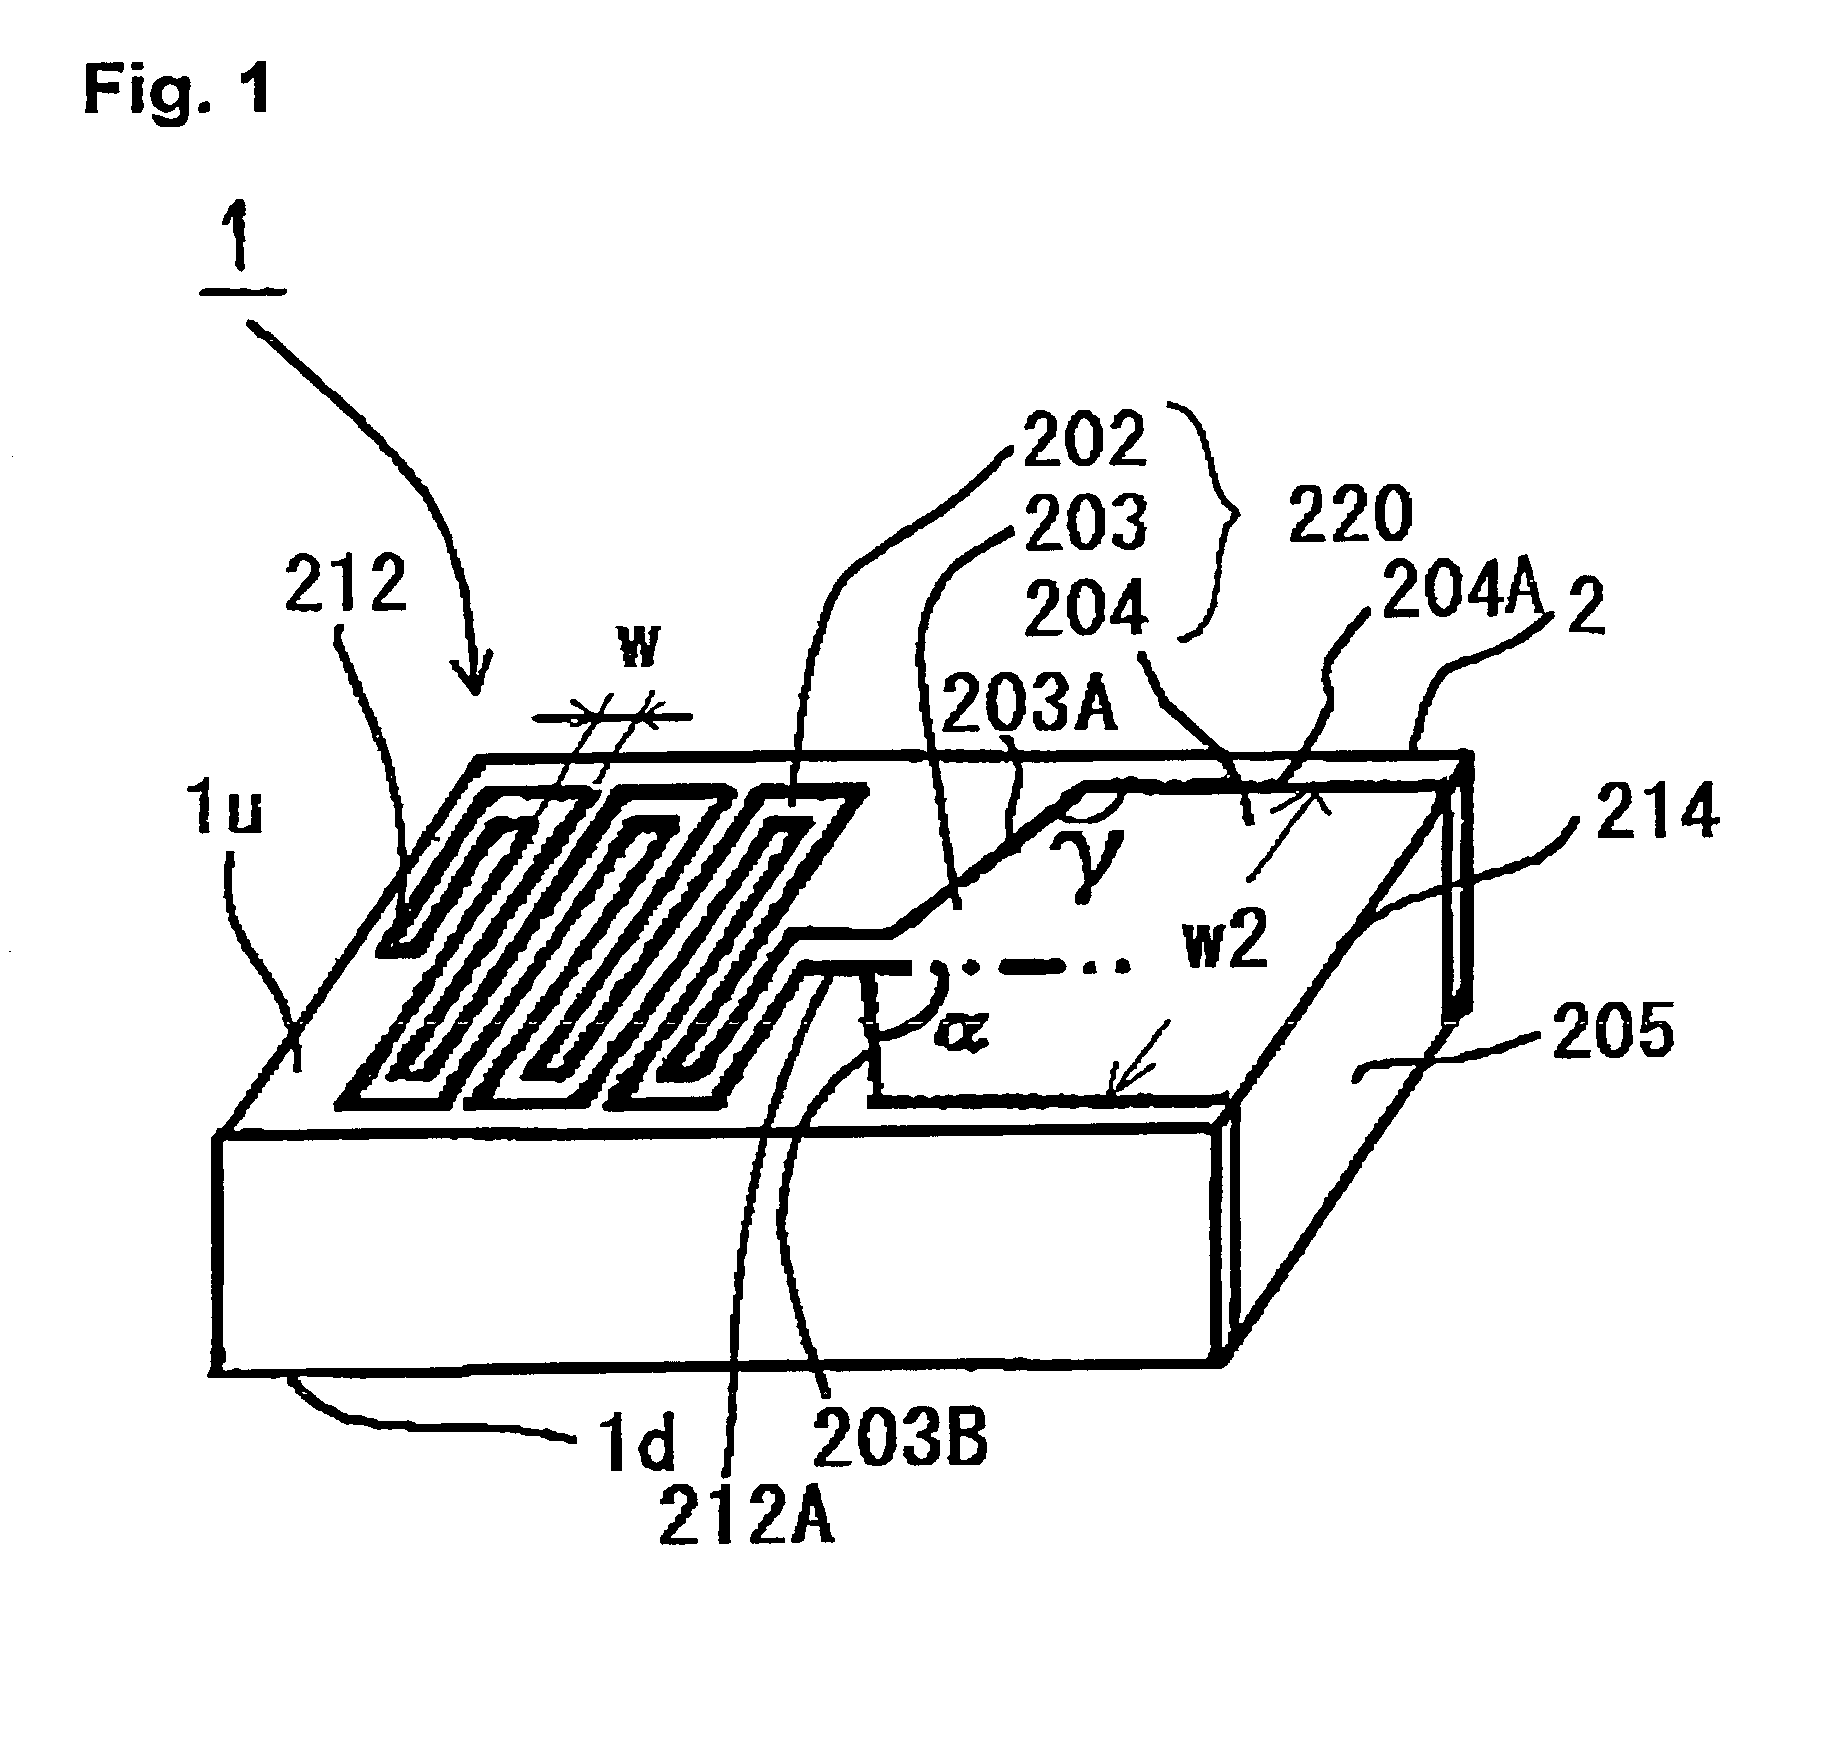 Dielectric antenna for high frequency wireless communication apparatus